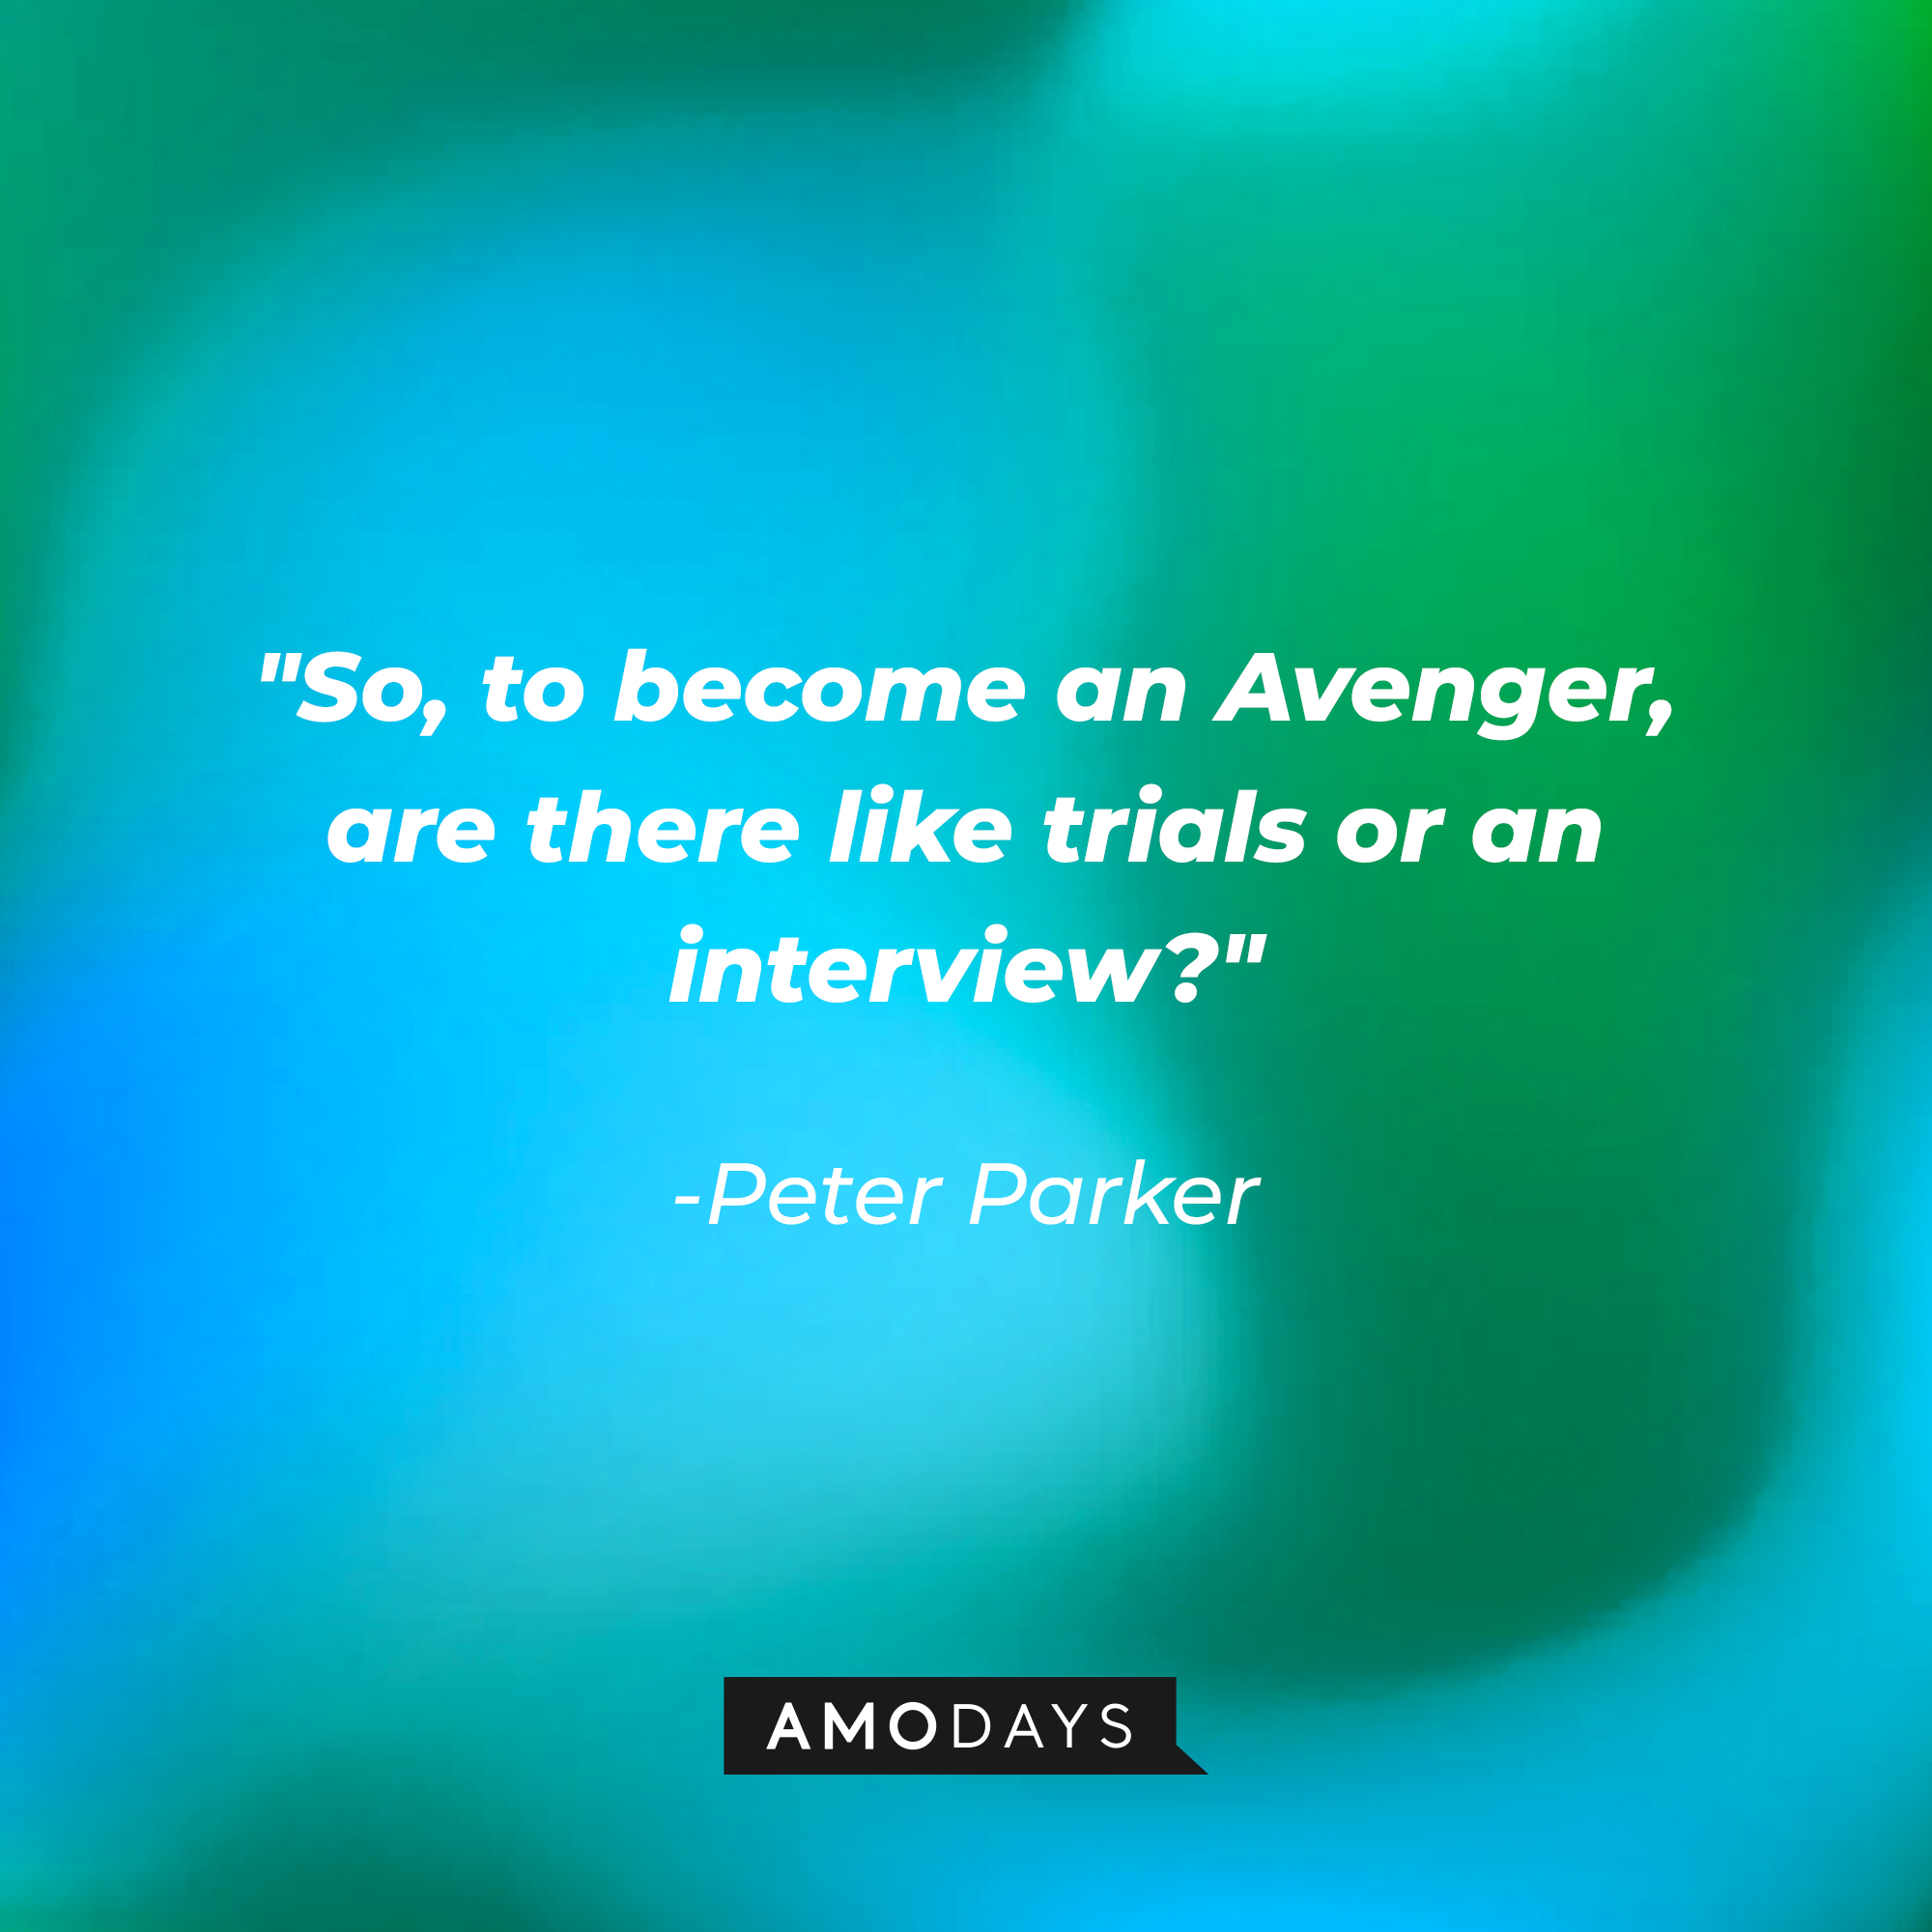 Peter Parker ‘s quote: So, to become an Avenger, are there like trials or an interview? | Image AmoDays